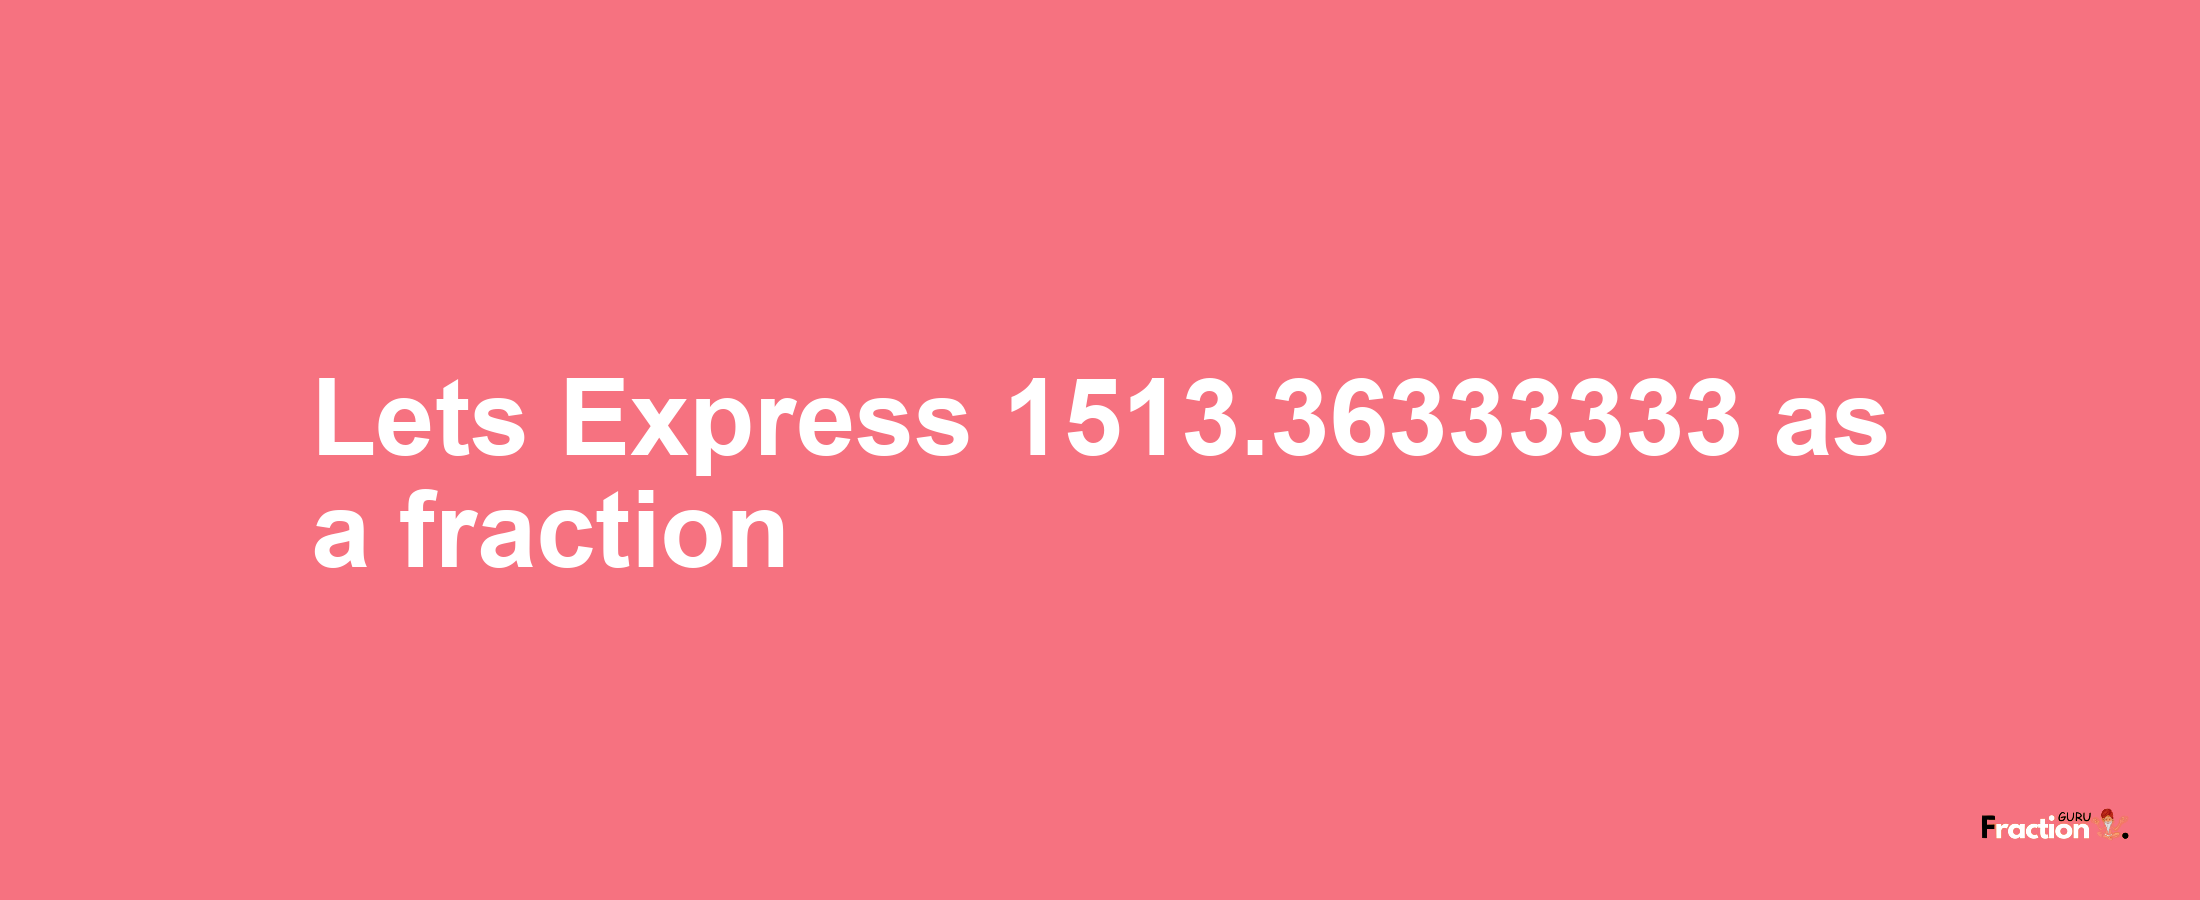 Lets Express 1513.36333333 as afraction